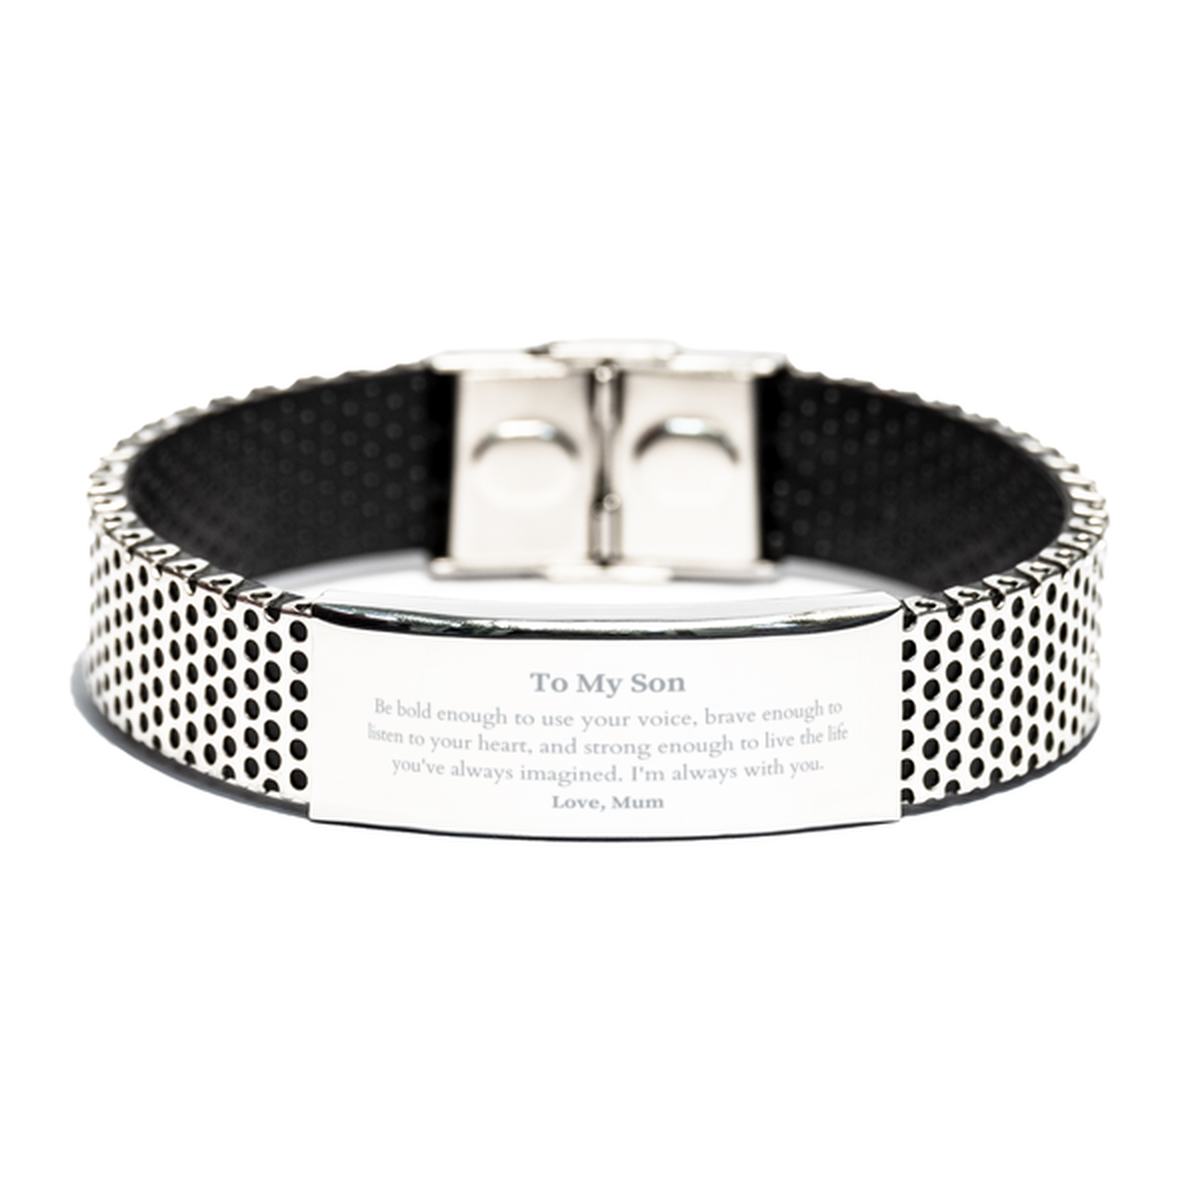 Keepsake Son Stainless Steel Bracelet Gift Idea Graduation Christmas Birthday Son from Mum, Son Be bold enough to use your voice, brave enough to listen to your heart. Love, Mum